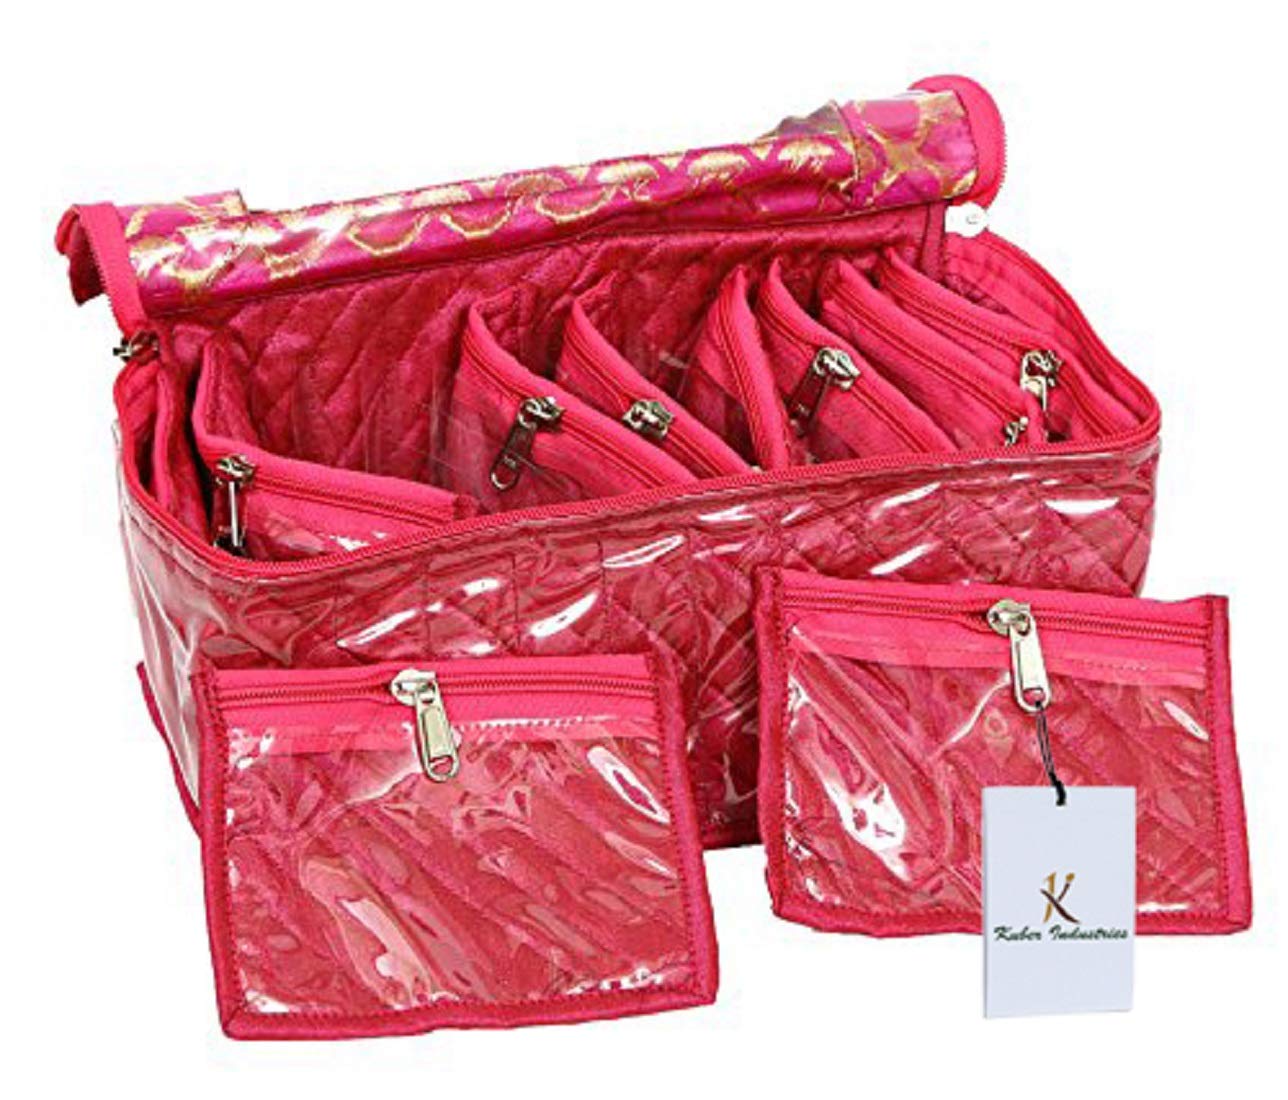 Kuber Industries Brocade Jewellery kit with 10 Pouch|Solid Print With Waterproof Outer Material|10 Pouches & Zipper Closure|Size 26 x 12 x 15, Pack of 1 (Pink)